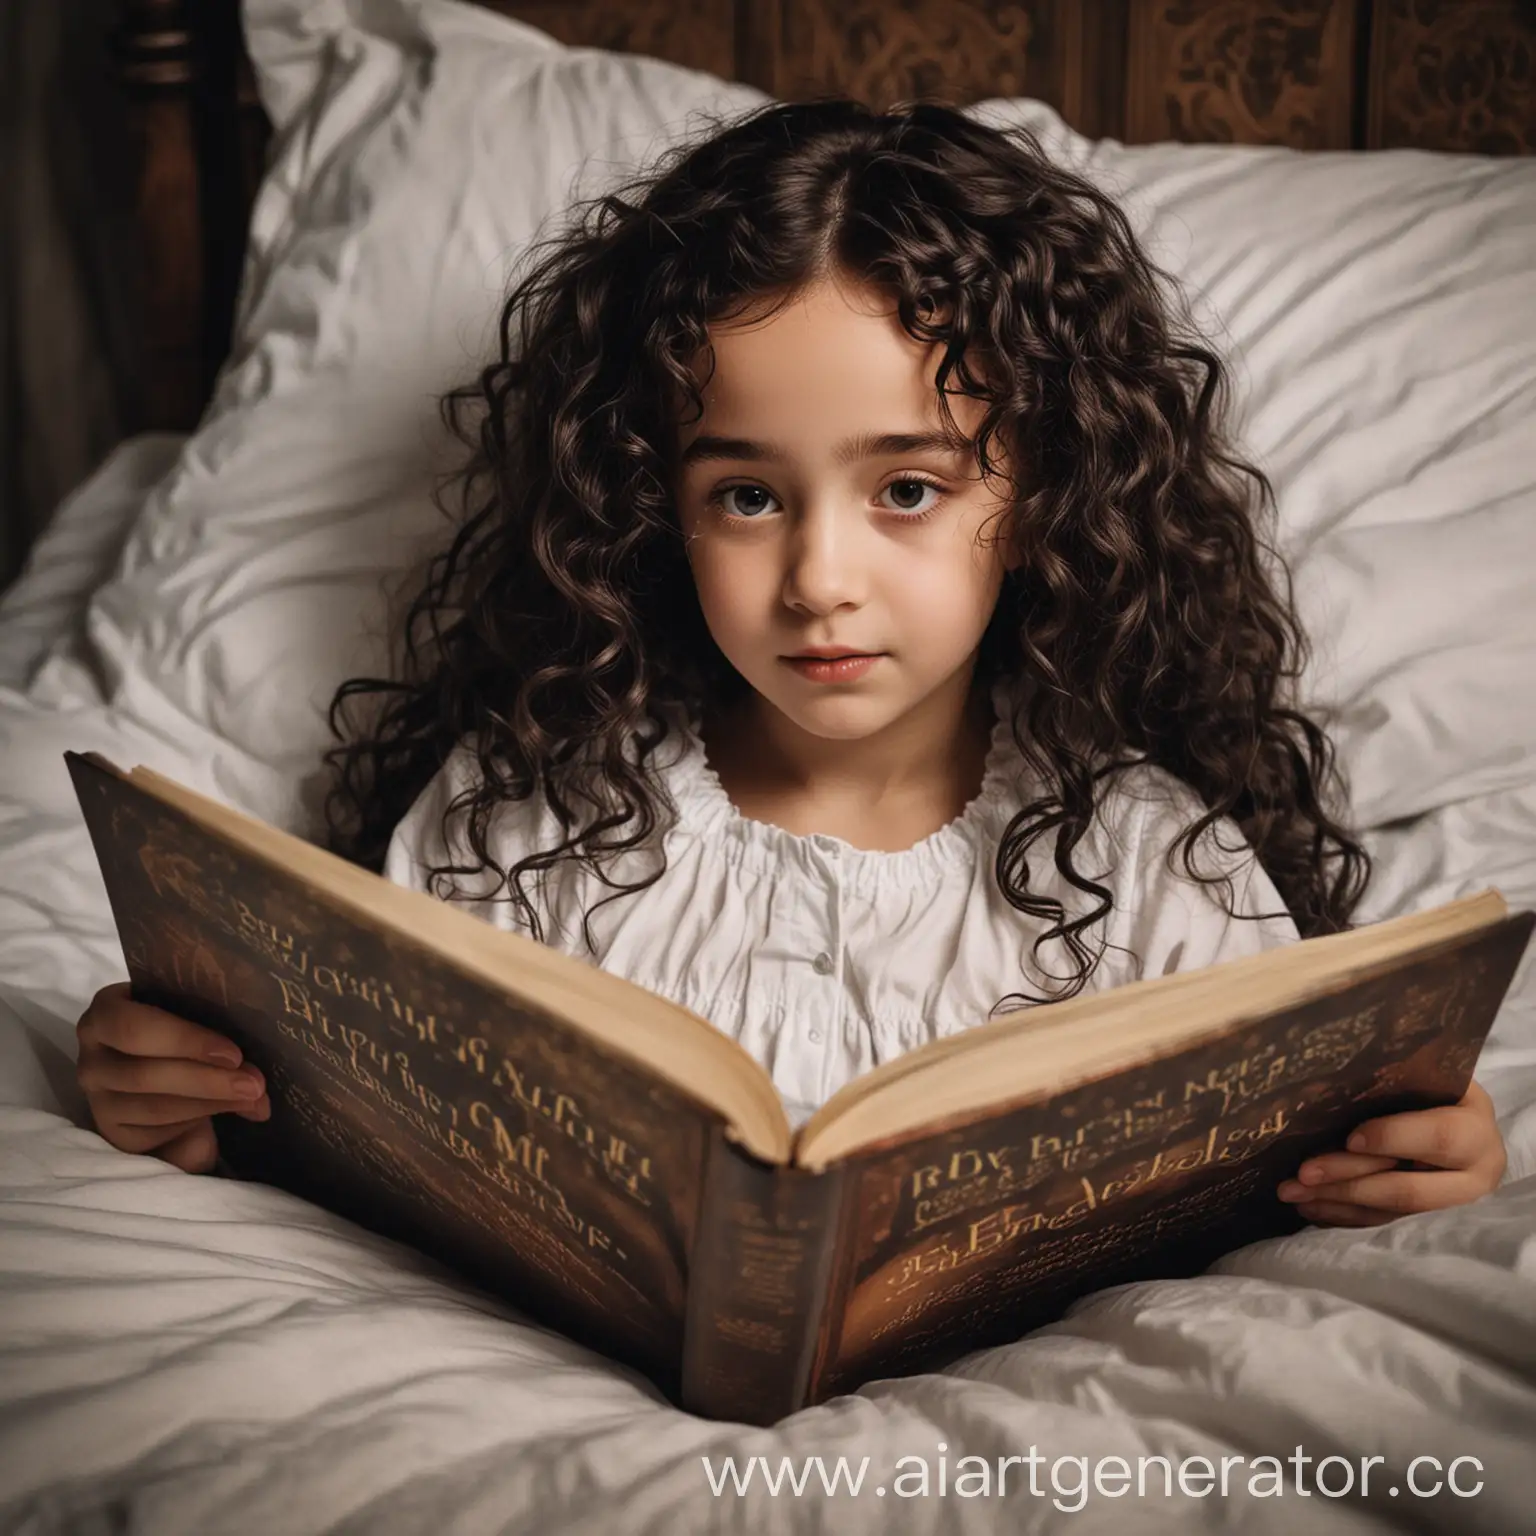 A beautiful little girl with dark curly long hair is lying in bed, and Draco Malfoy is reading her a bedtime story